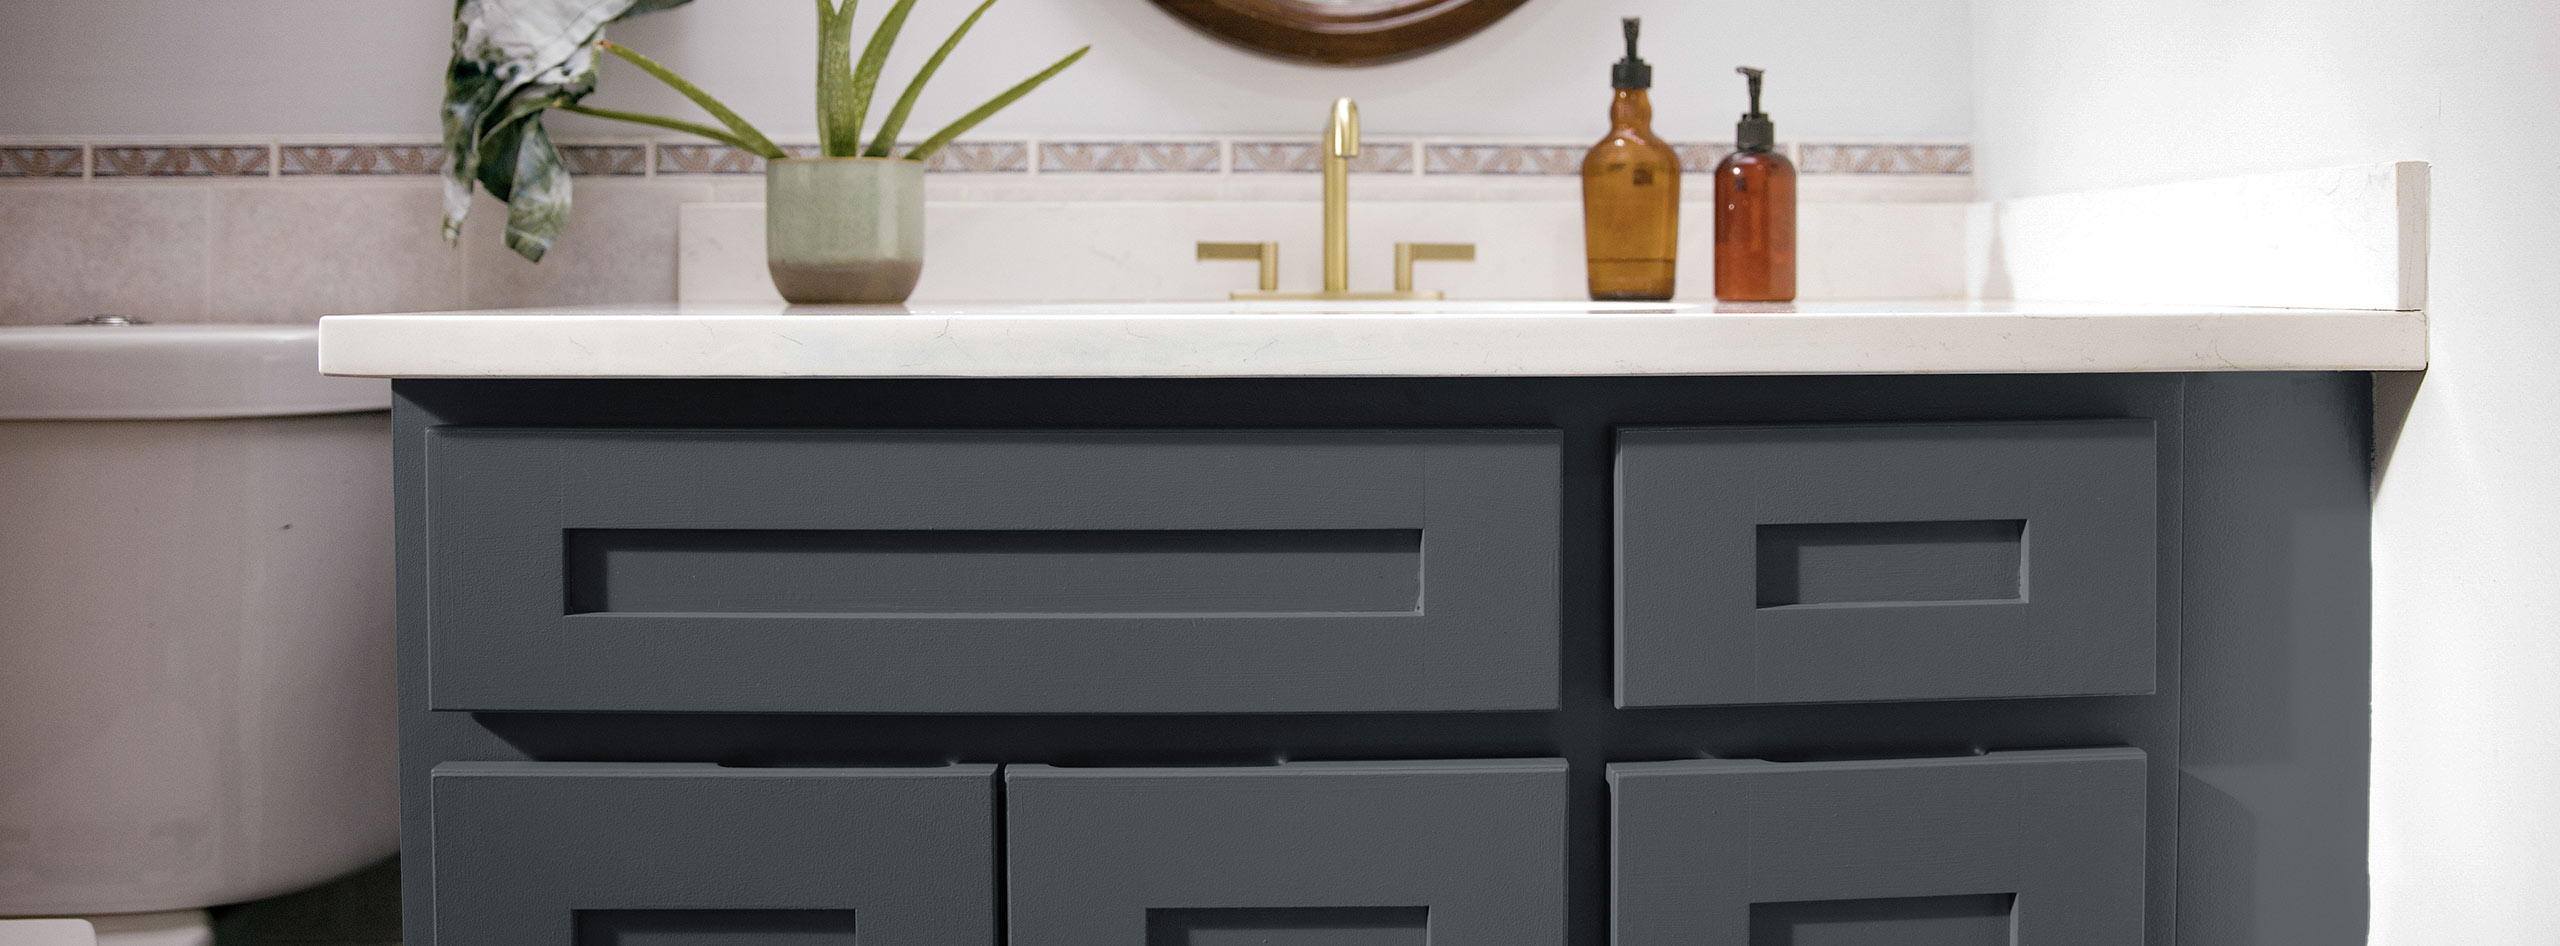 A close-up of a dark bathroom vanity cabinet, white countertops, muted pink tiles backsplash, and one indoor plant.